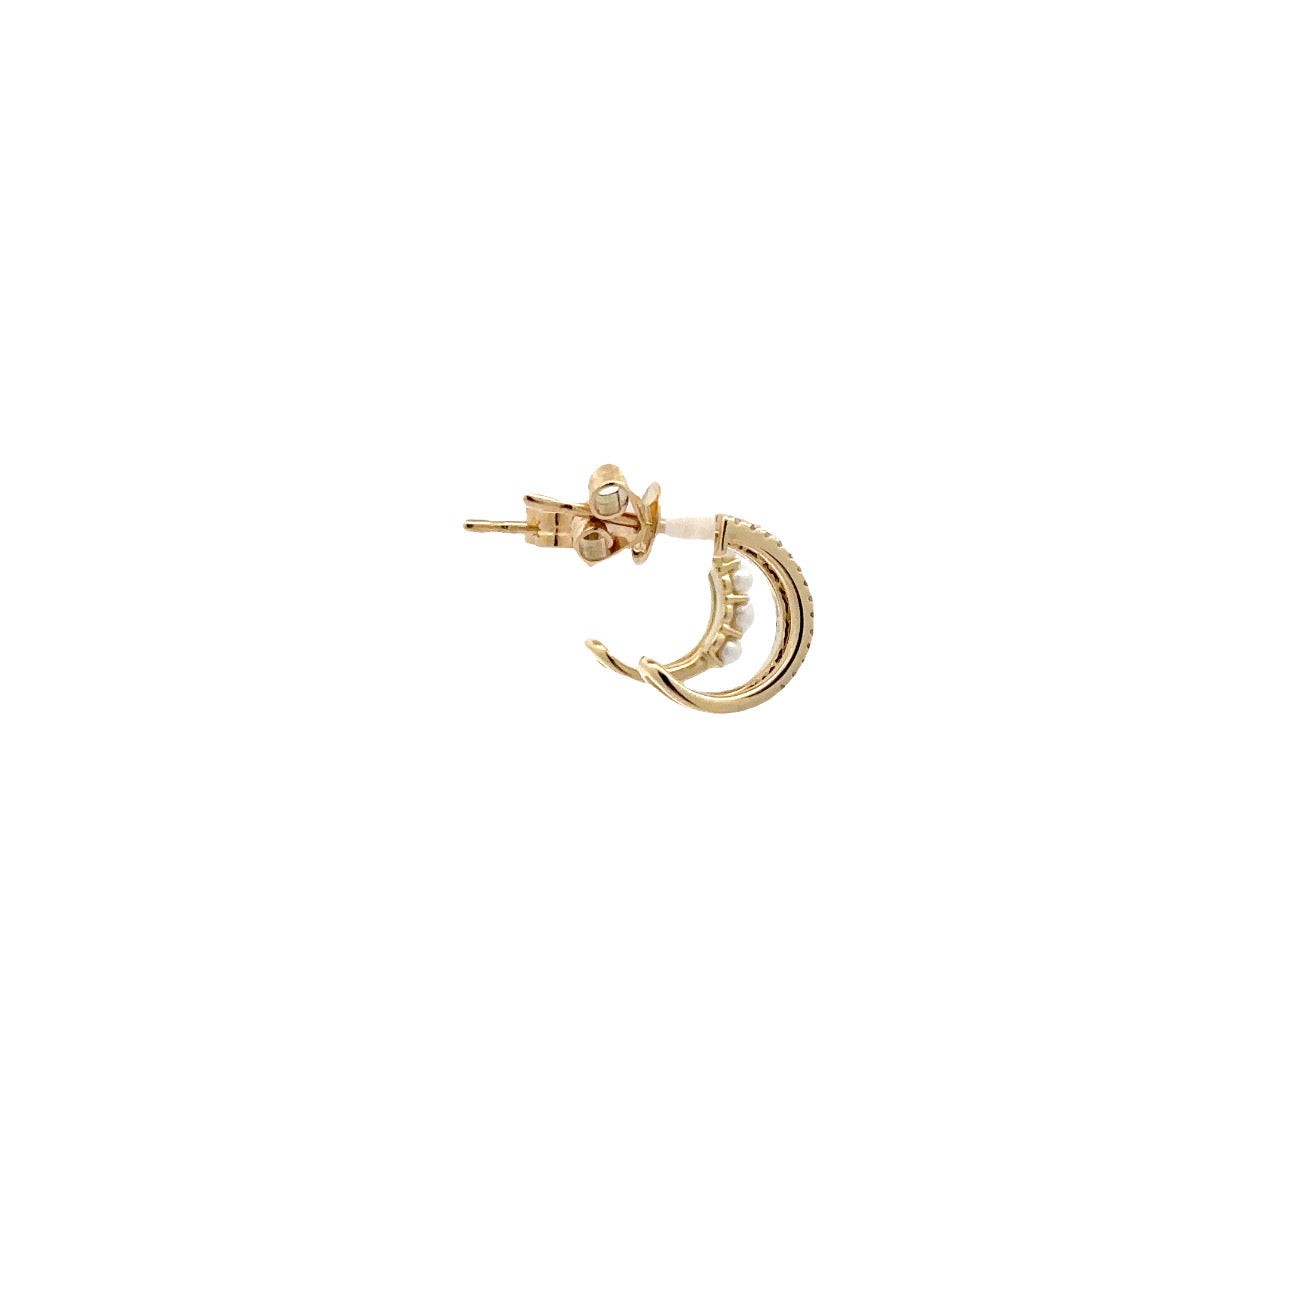 WD1165 14KT GOLD DIAMOND & SEED PEARL HOOPS